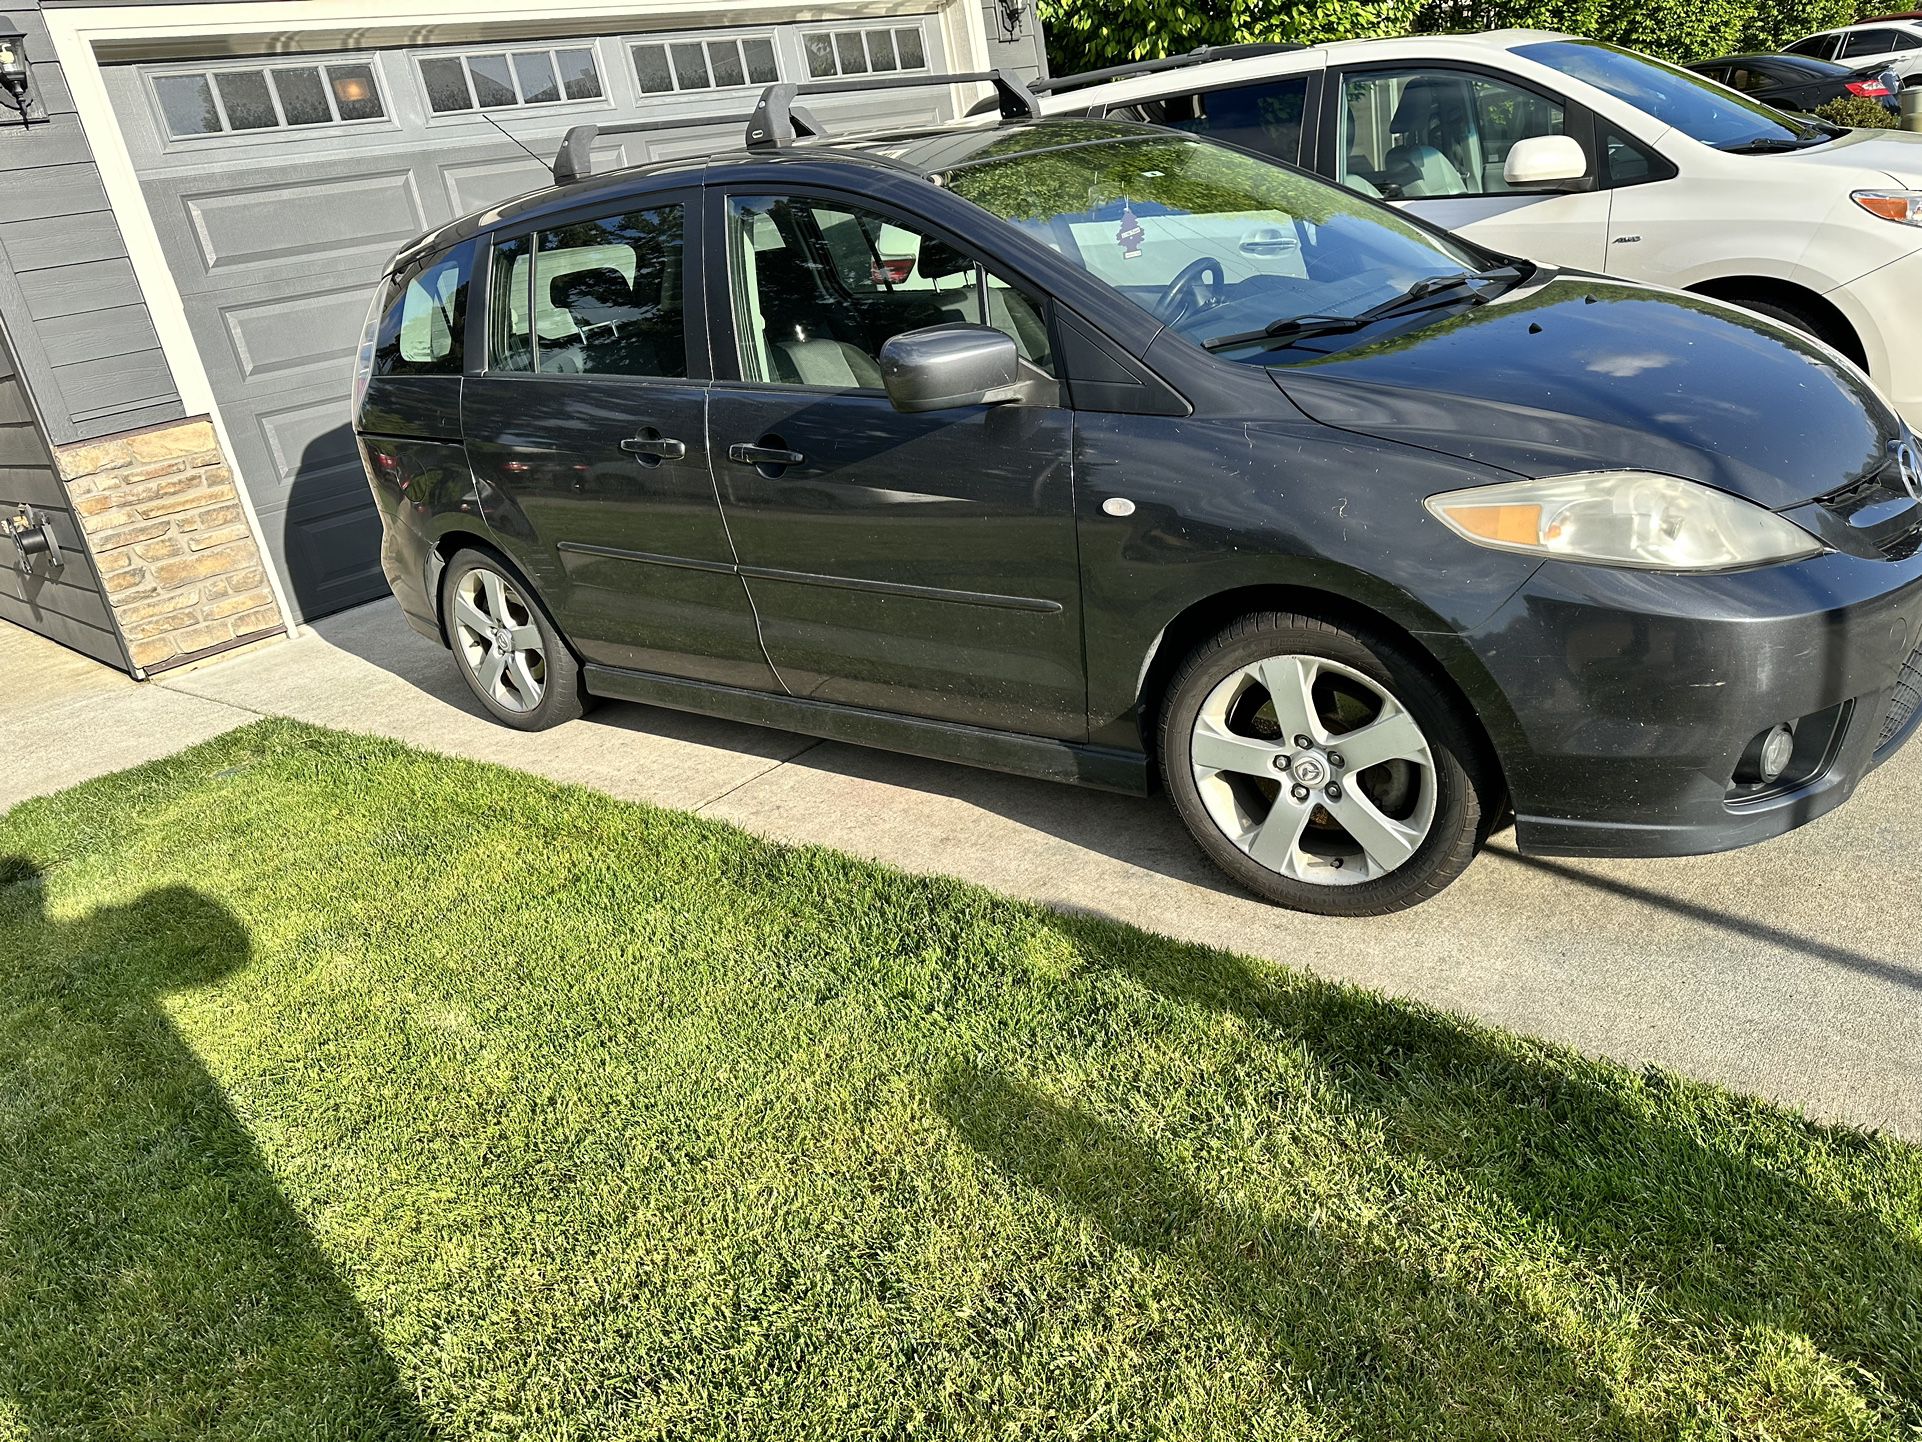 2006 Mazda 5 Up For Sale/ Mechanic Special